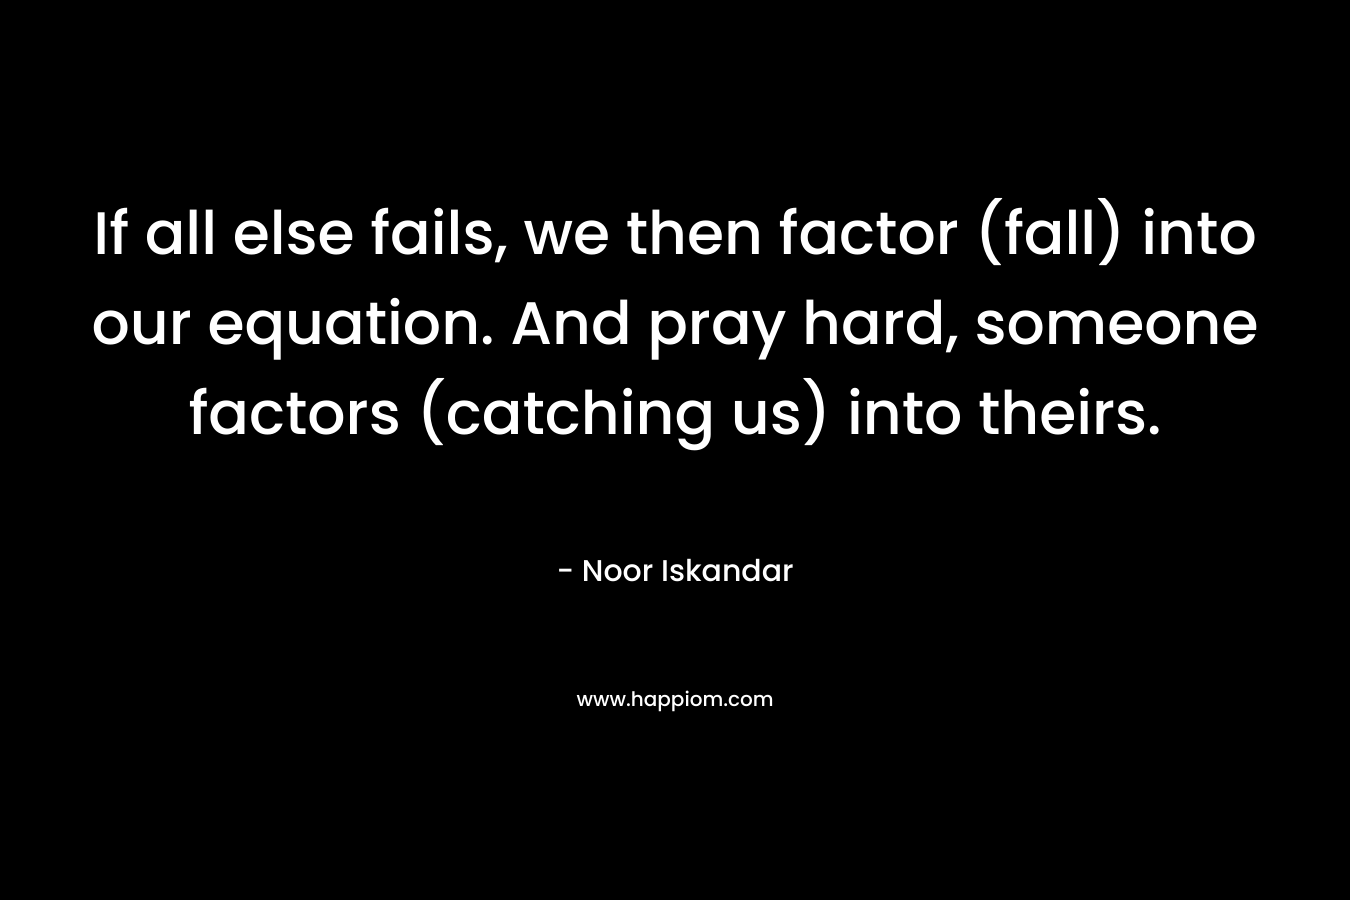 If all else fails, we then factor (fall) into our equation. And pray hard, someone factors (catching us) into theirs. – Noor Iskandar